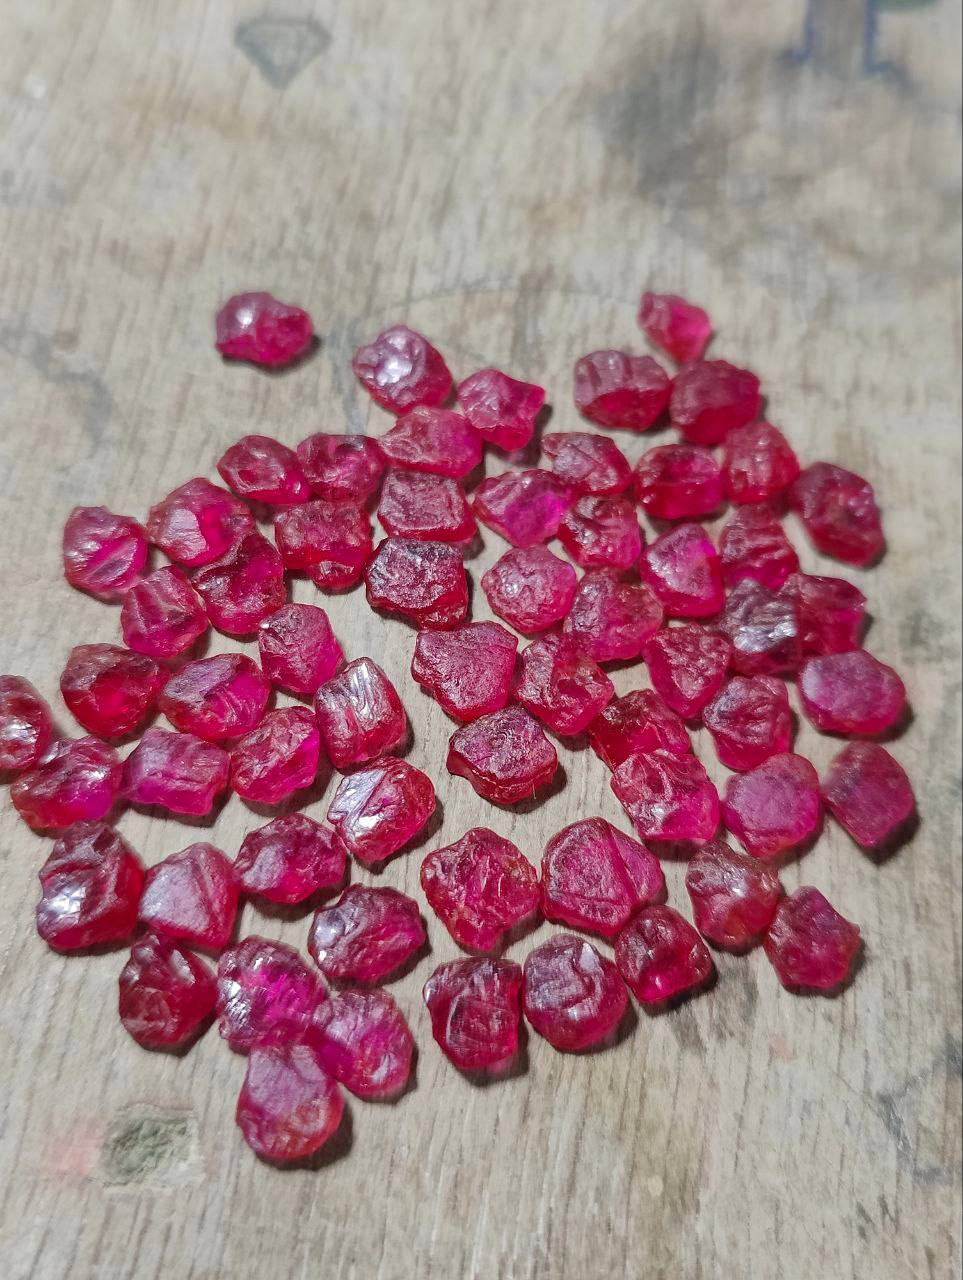 Ethically sourced Mozambique Ruby Rough, Wholesale Ruby, Rough Ruby